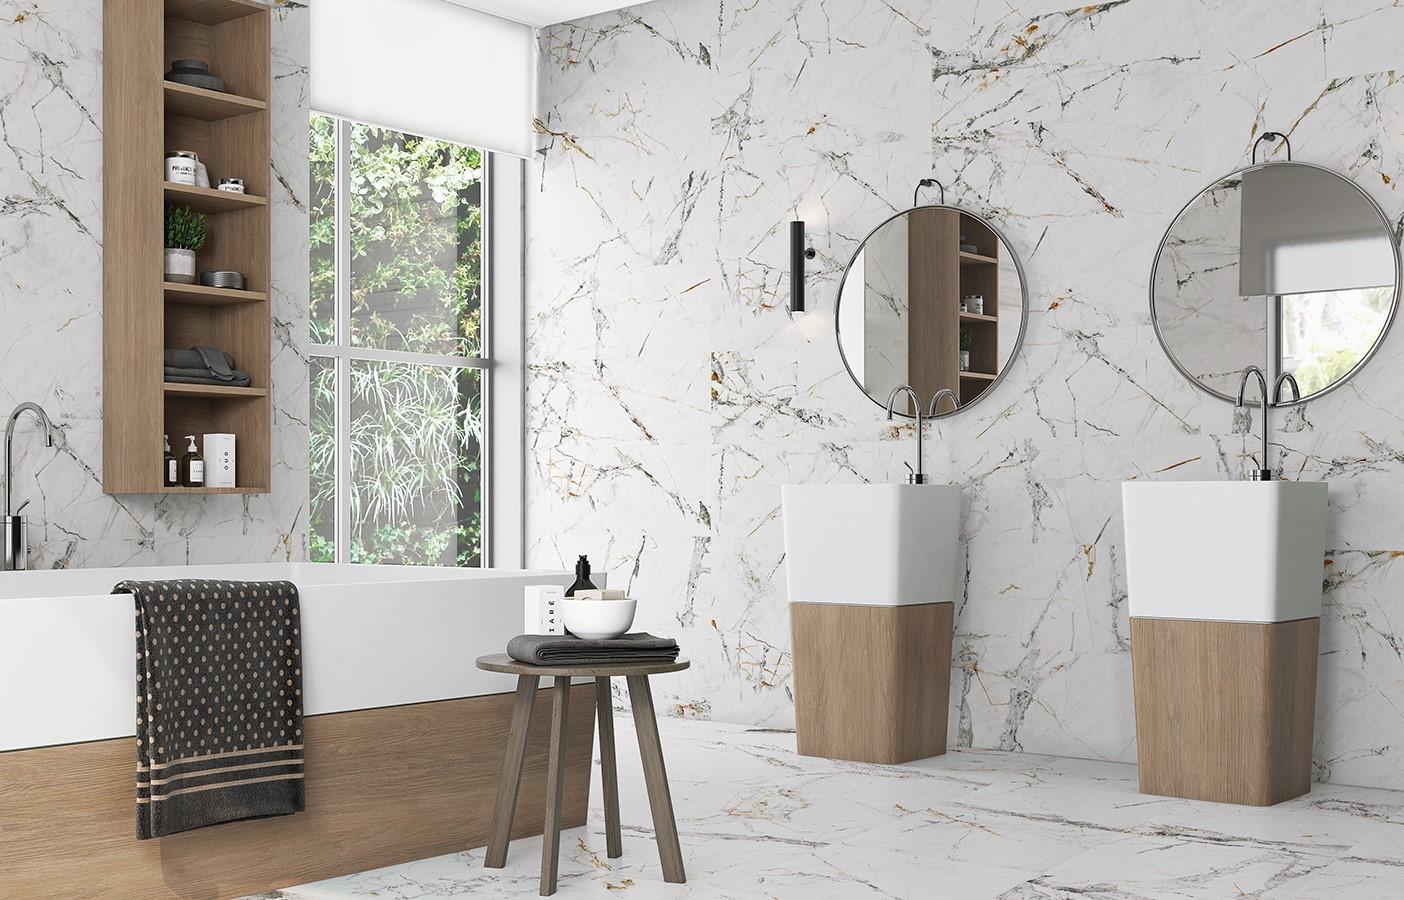 <h2>Discover our extensive range of Tiles, <br>Bathroom Ware and Wood Flooring</h2><p>From Classic to Modern Styles</p> SHOWROOM OPEN FOR WALK INS, OPENING HOURS : MONDAY - SATURDAY 10AM - 5PM